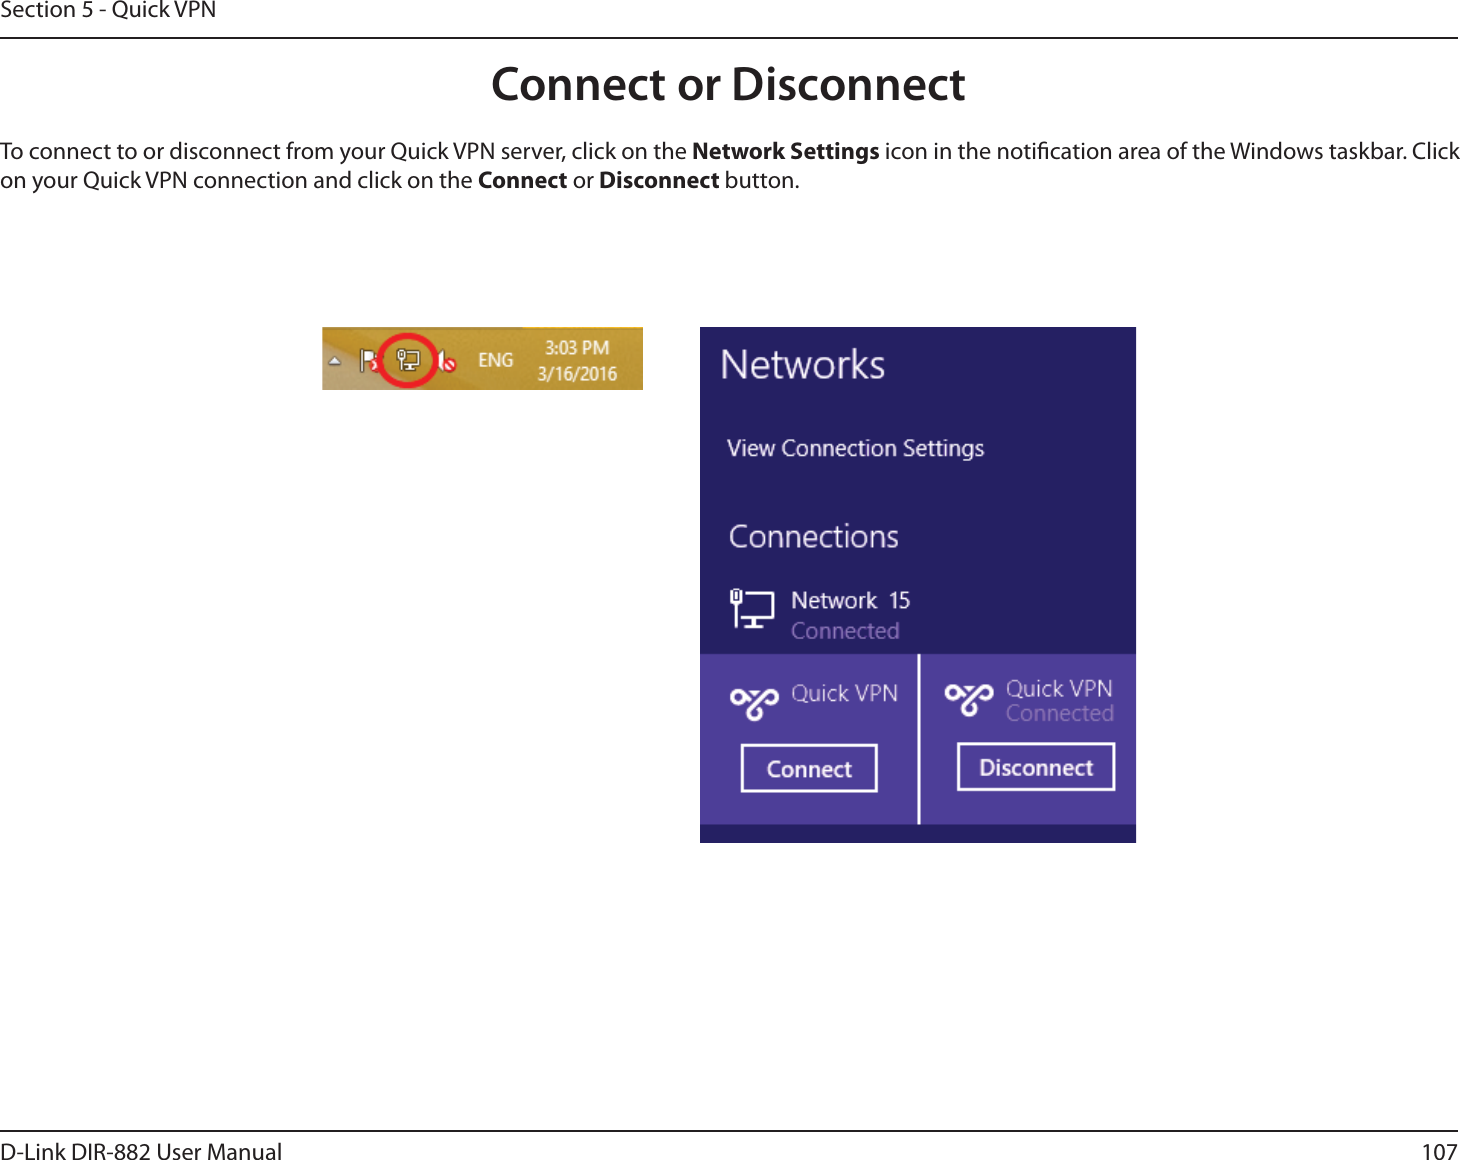 107D-Link DIR-882 User ManualSection 5 - Quick VPNConnect or DisconnectTo connect to or disconnect from your Quick VPN server, click on the Network Settings icon in the notication area of the Windows taskbar. Click on your Quick VPN connection and click on the Connect or Disconnect button.